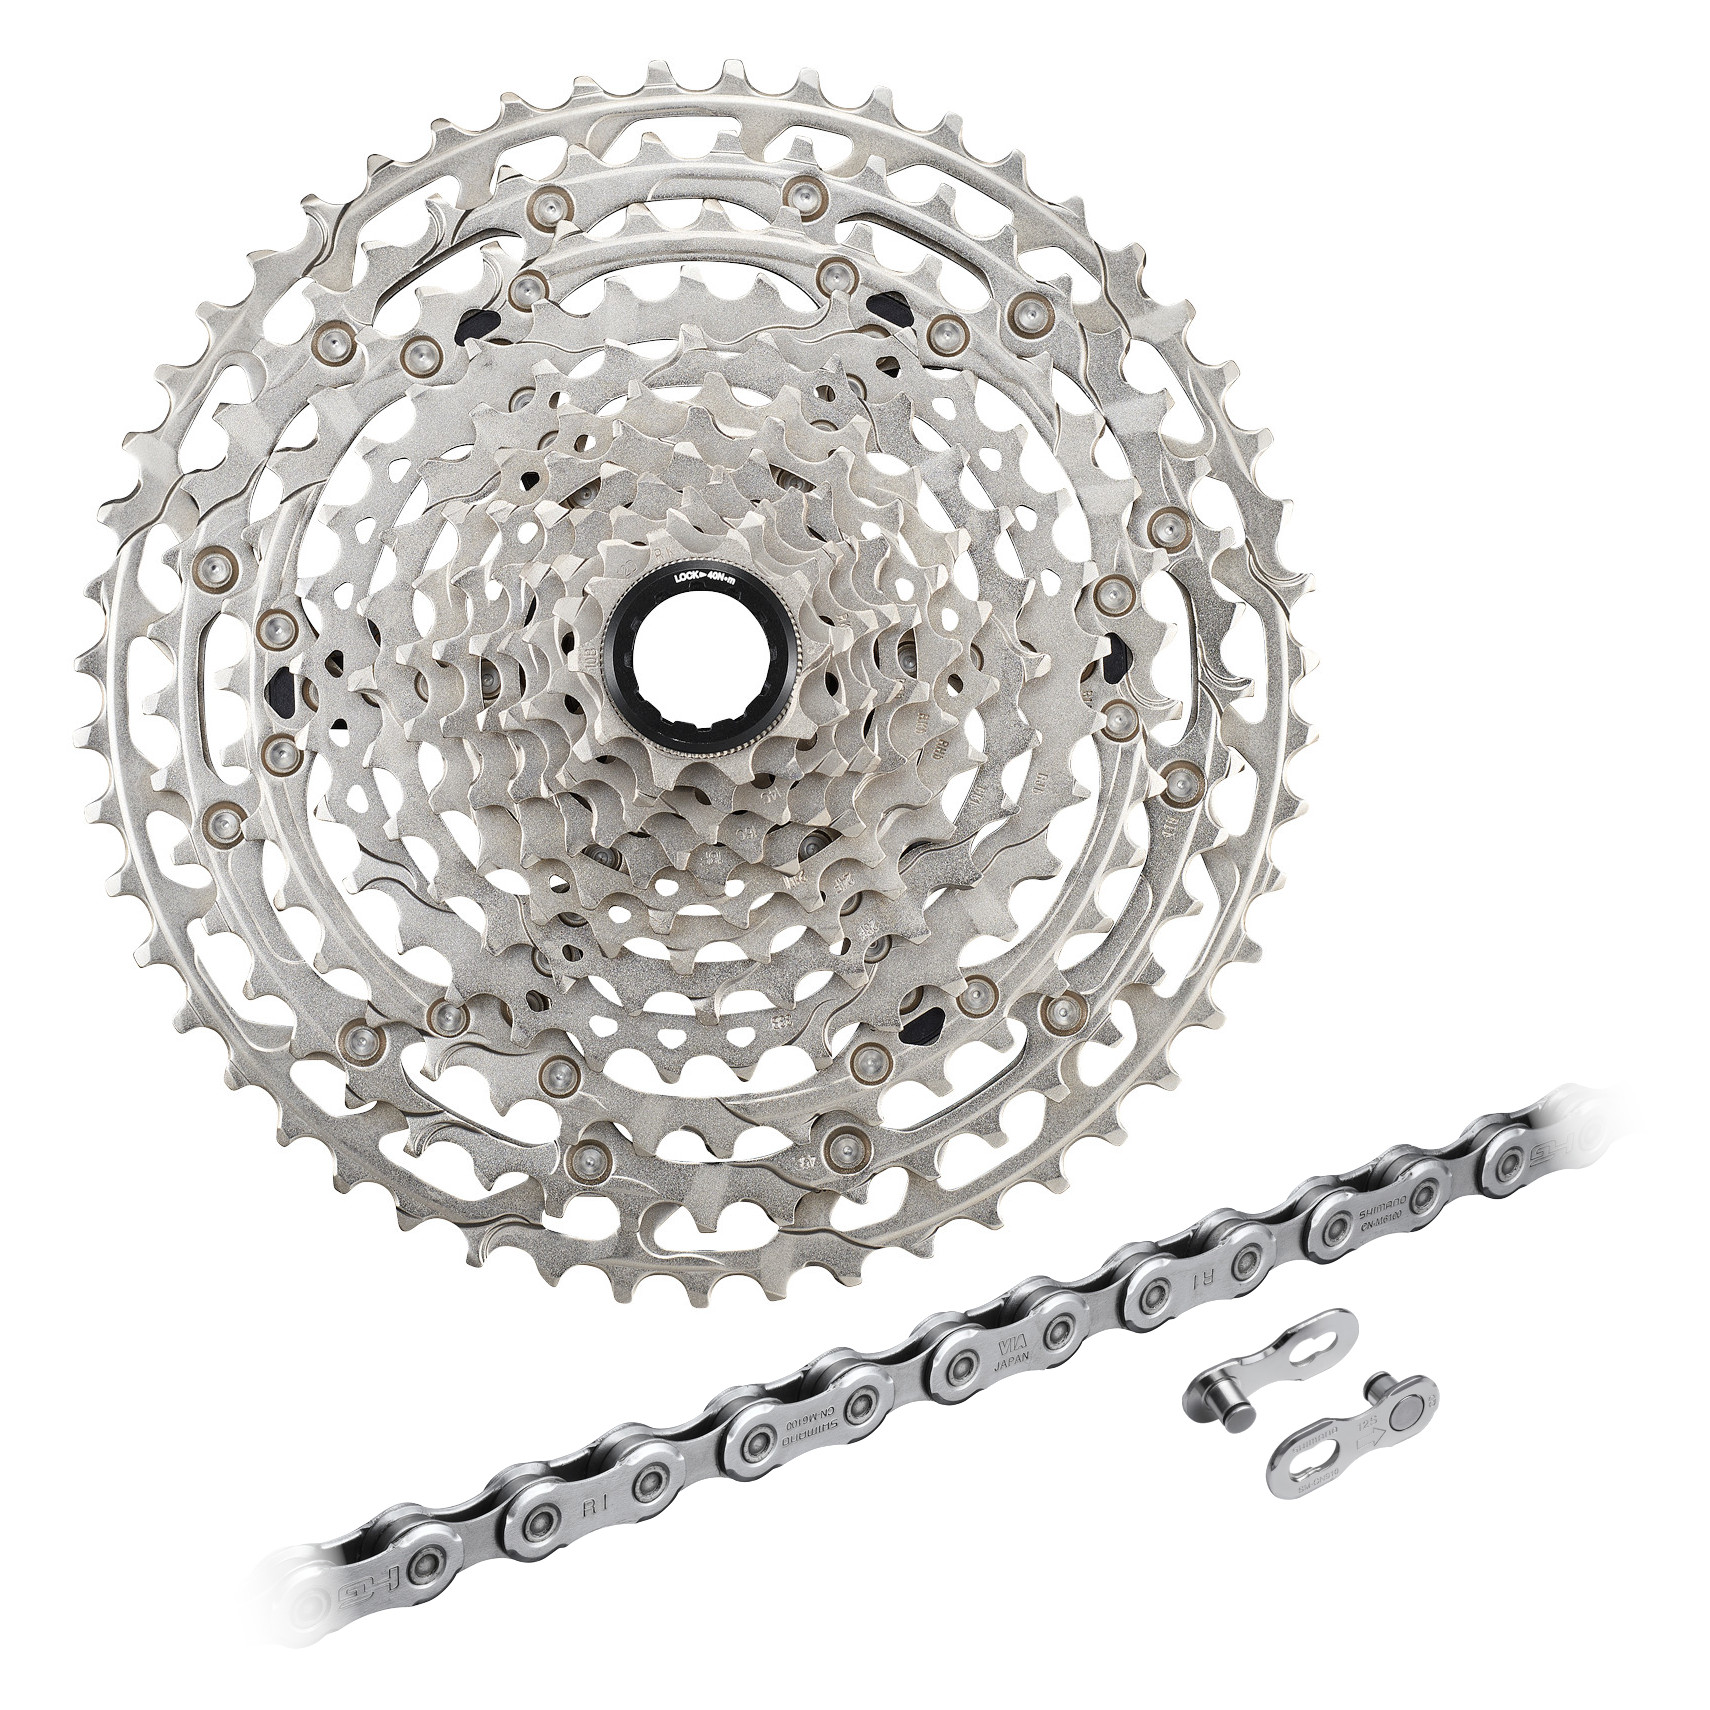 Picture of Shimano Deore 12-speed Wear &amp; Tear Set - CS-M6100 Cassette + CN-M6100 Chain